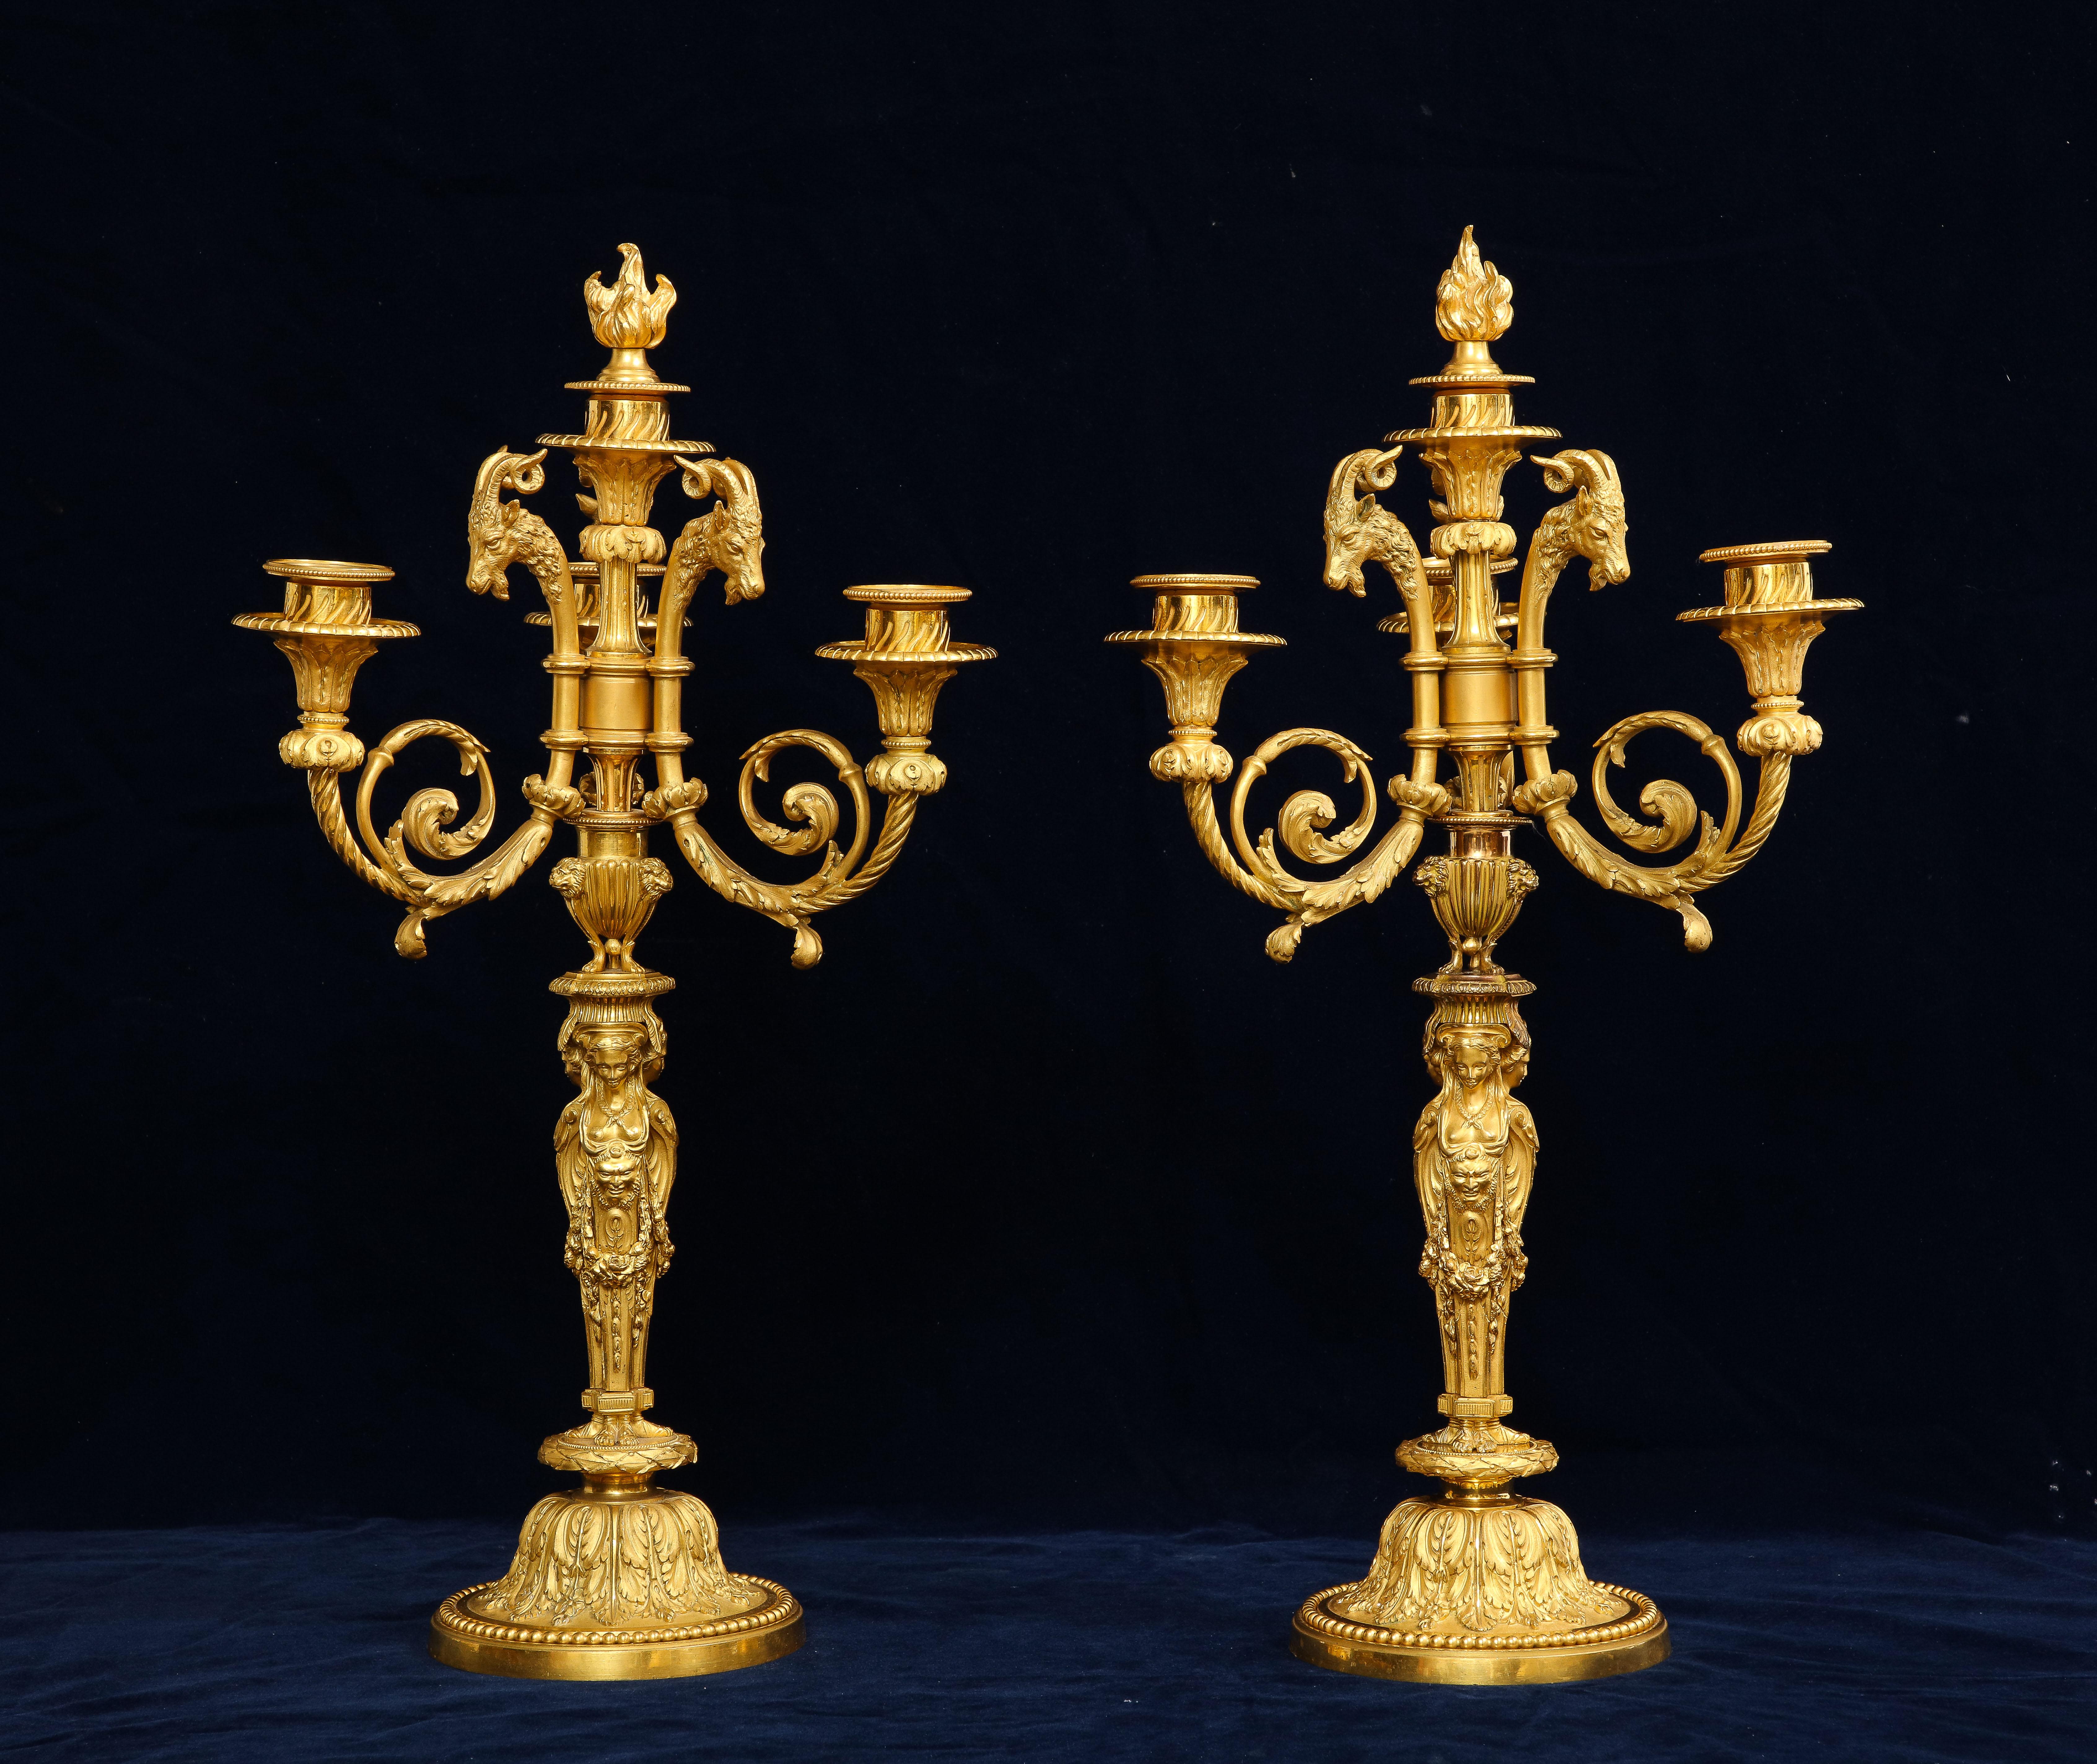 Gilt Pair of French 19th C. Ormolu Figural 4 Light Candelabras, After P. Gouthiere For Sale